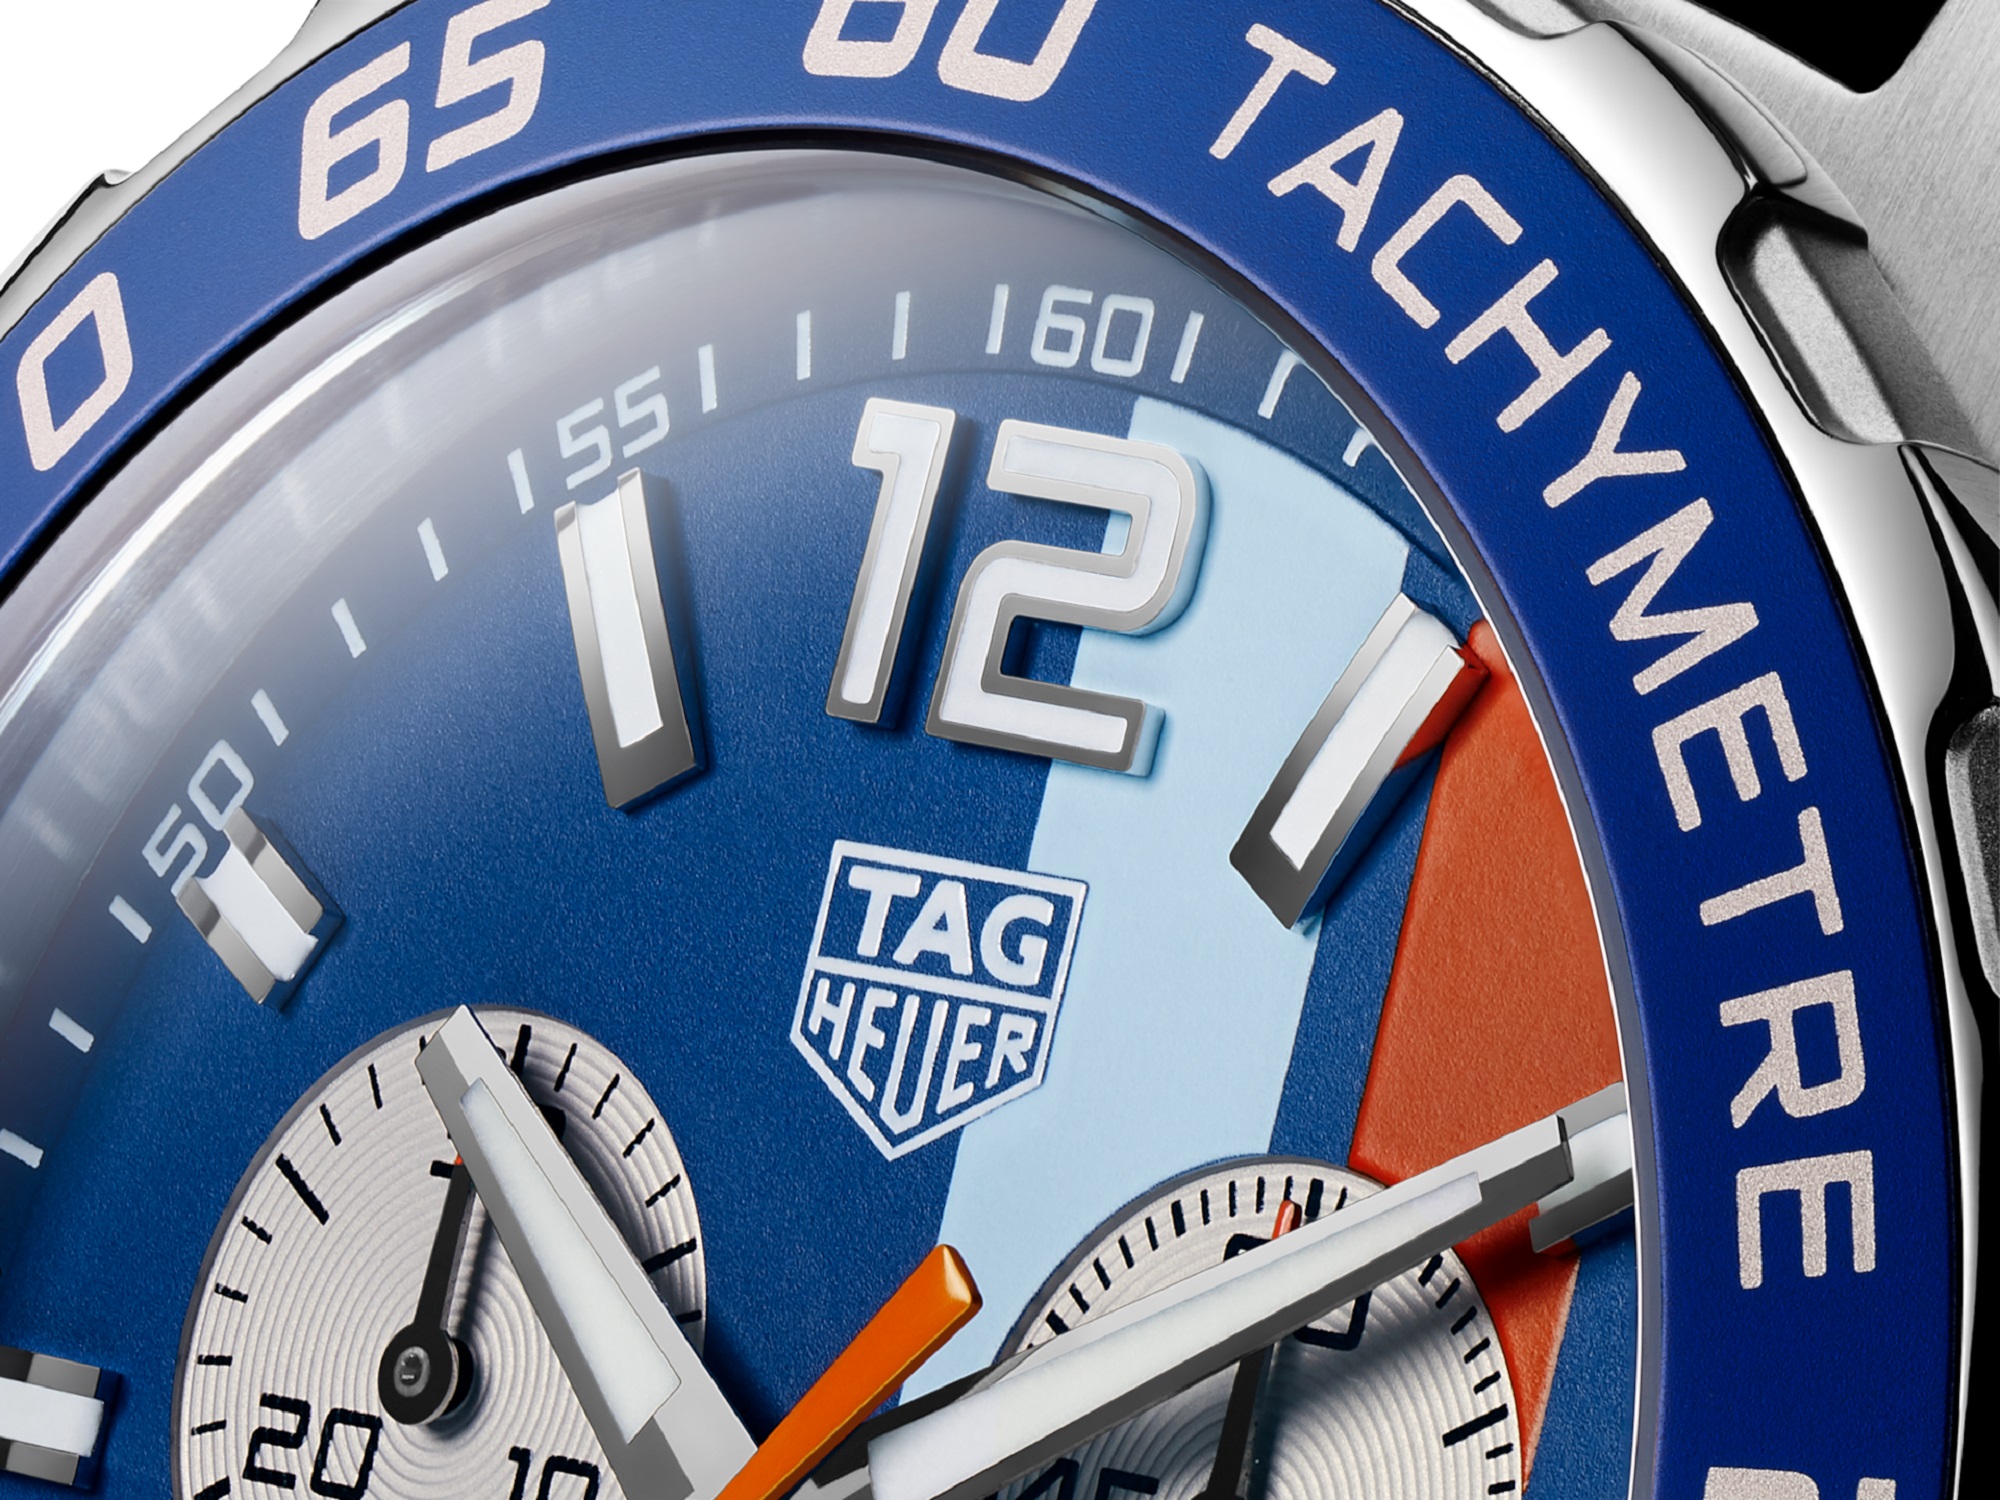 Tag Heuer Chronograph close up